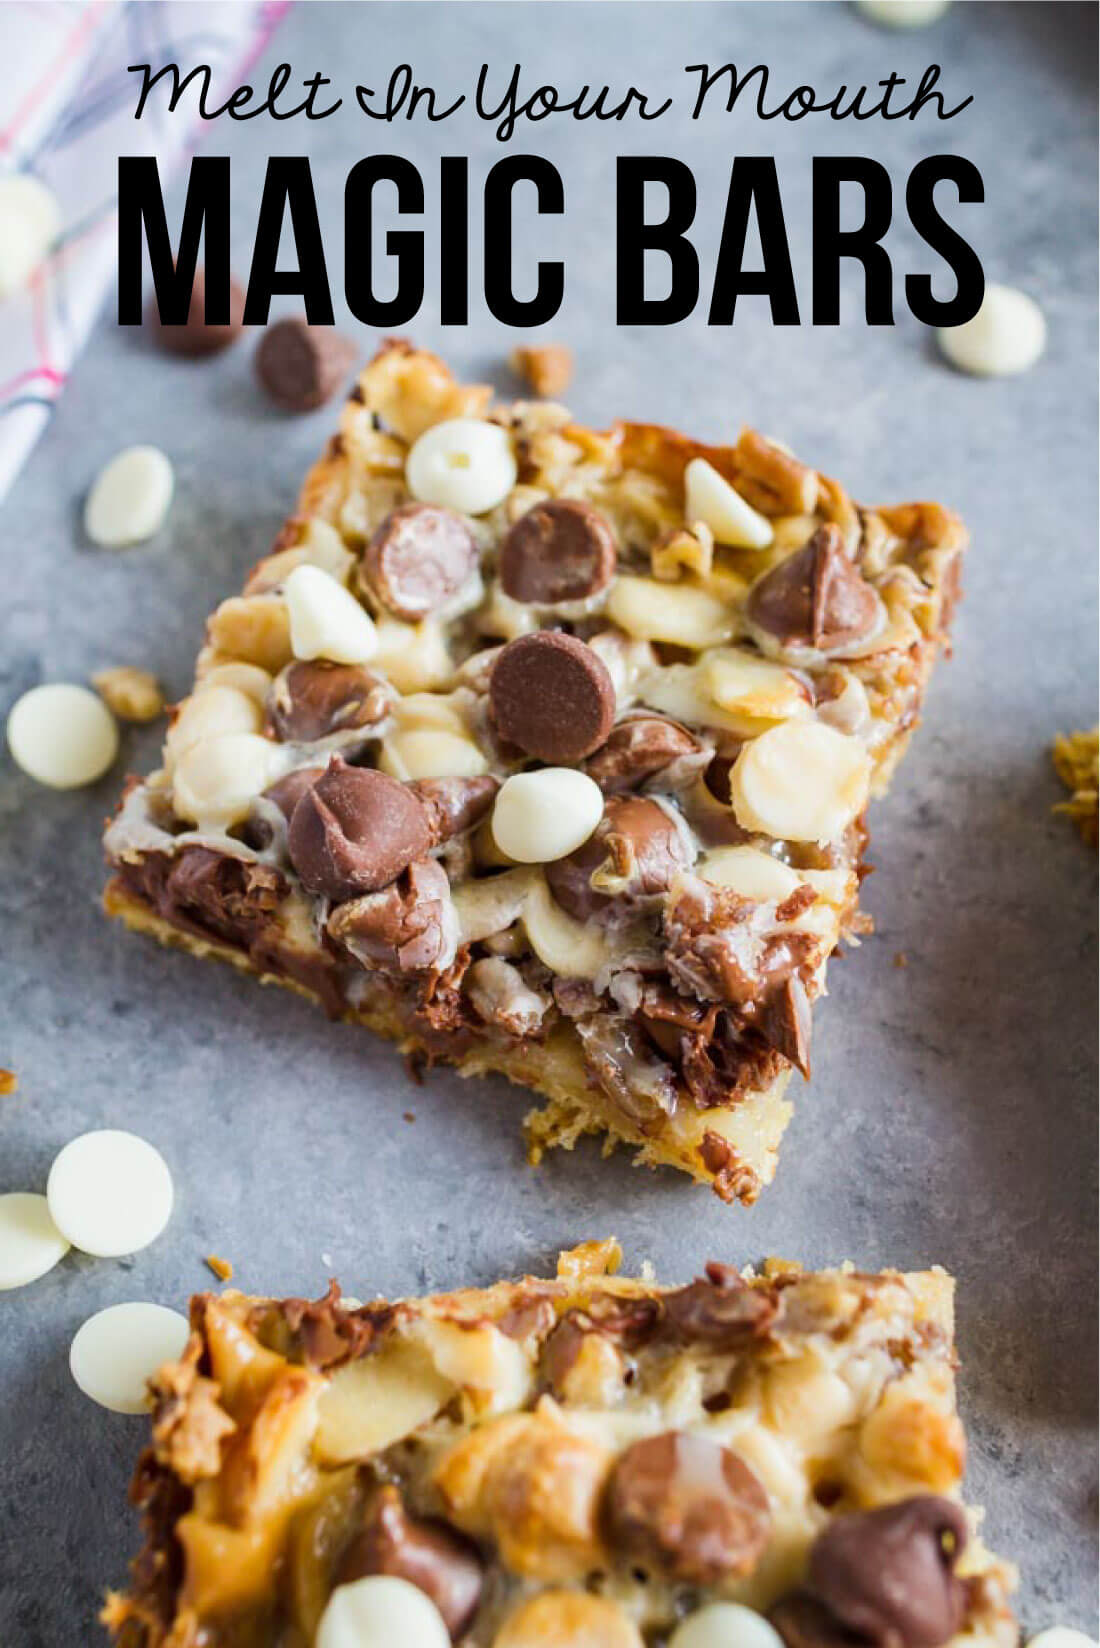 Melt In Your Mouth Magic Bars - you only need a few ingredients to make this amazing dessert. from www.thirtyhandmadedays.com